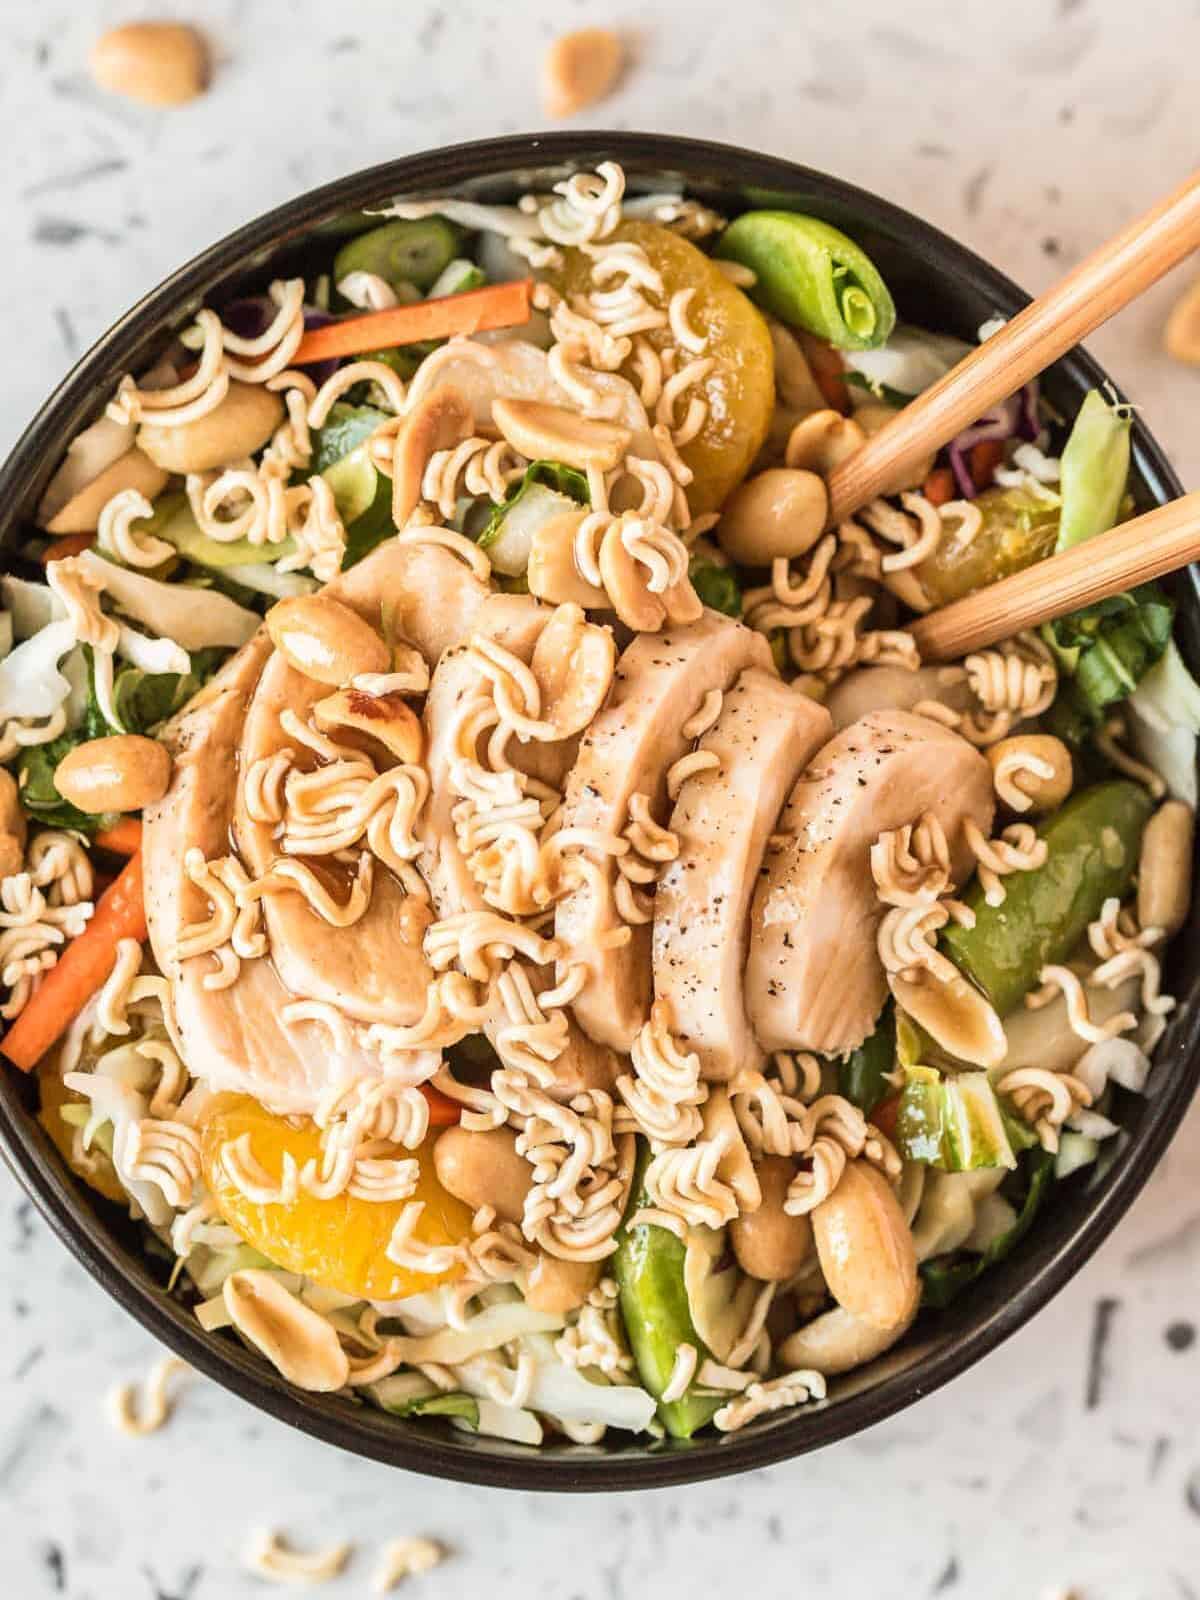 A bowl of Chinese chicken salad with ramen noodles, chopped chicken, peanuts, dressing, mandarin oranges, and veggies.